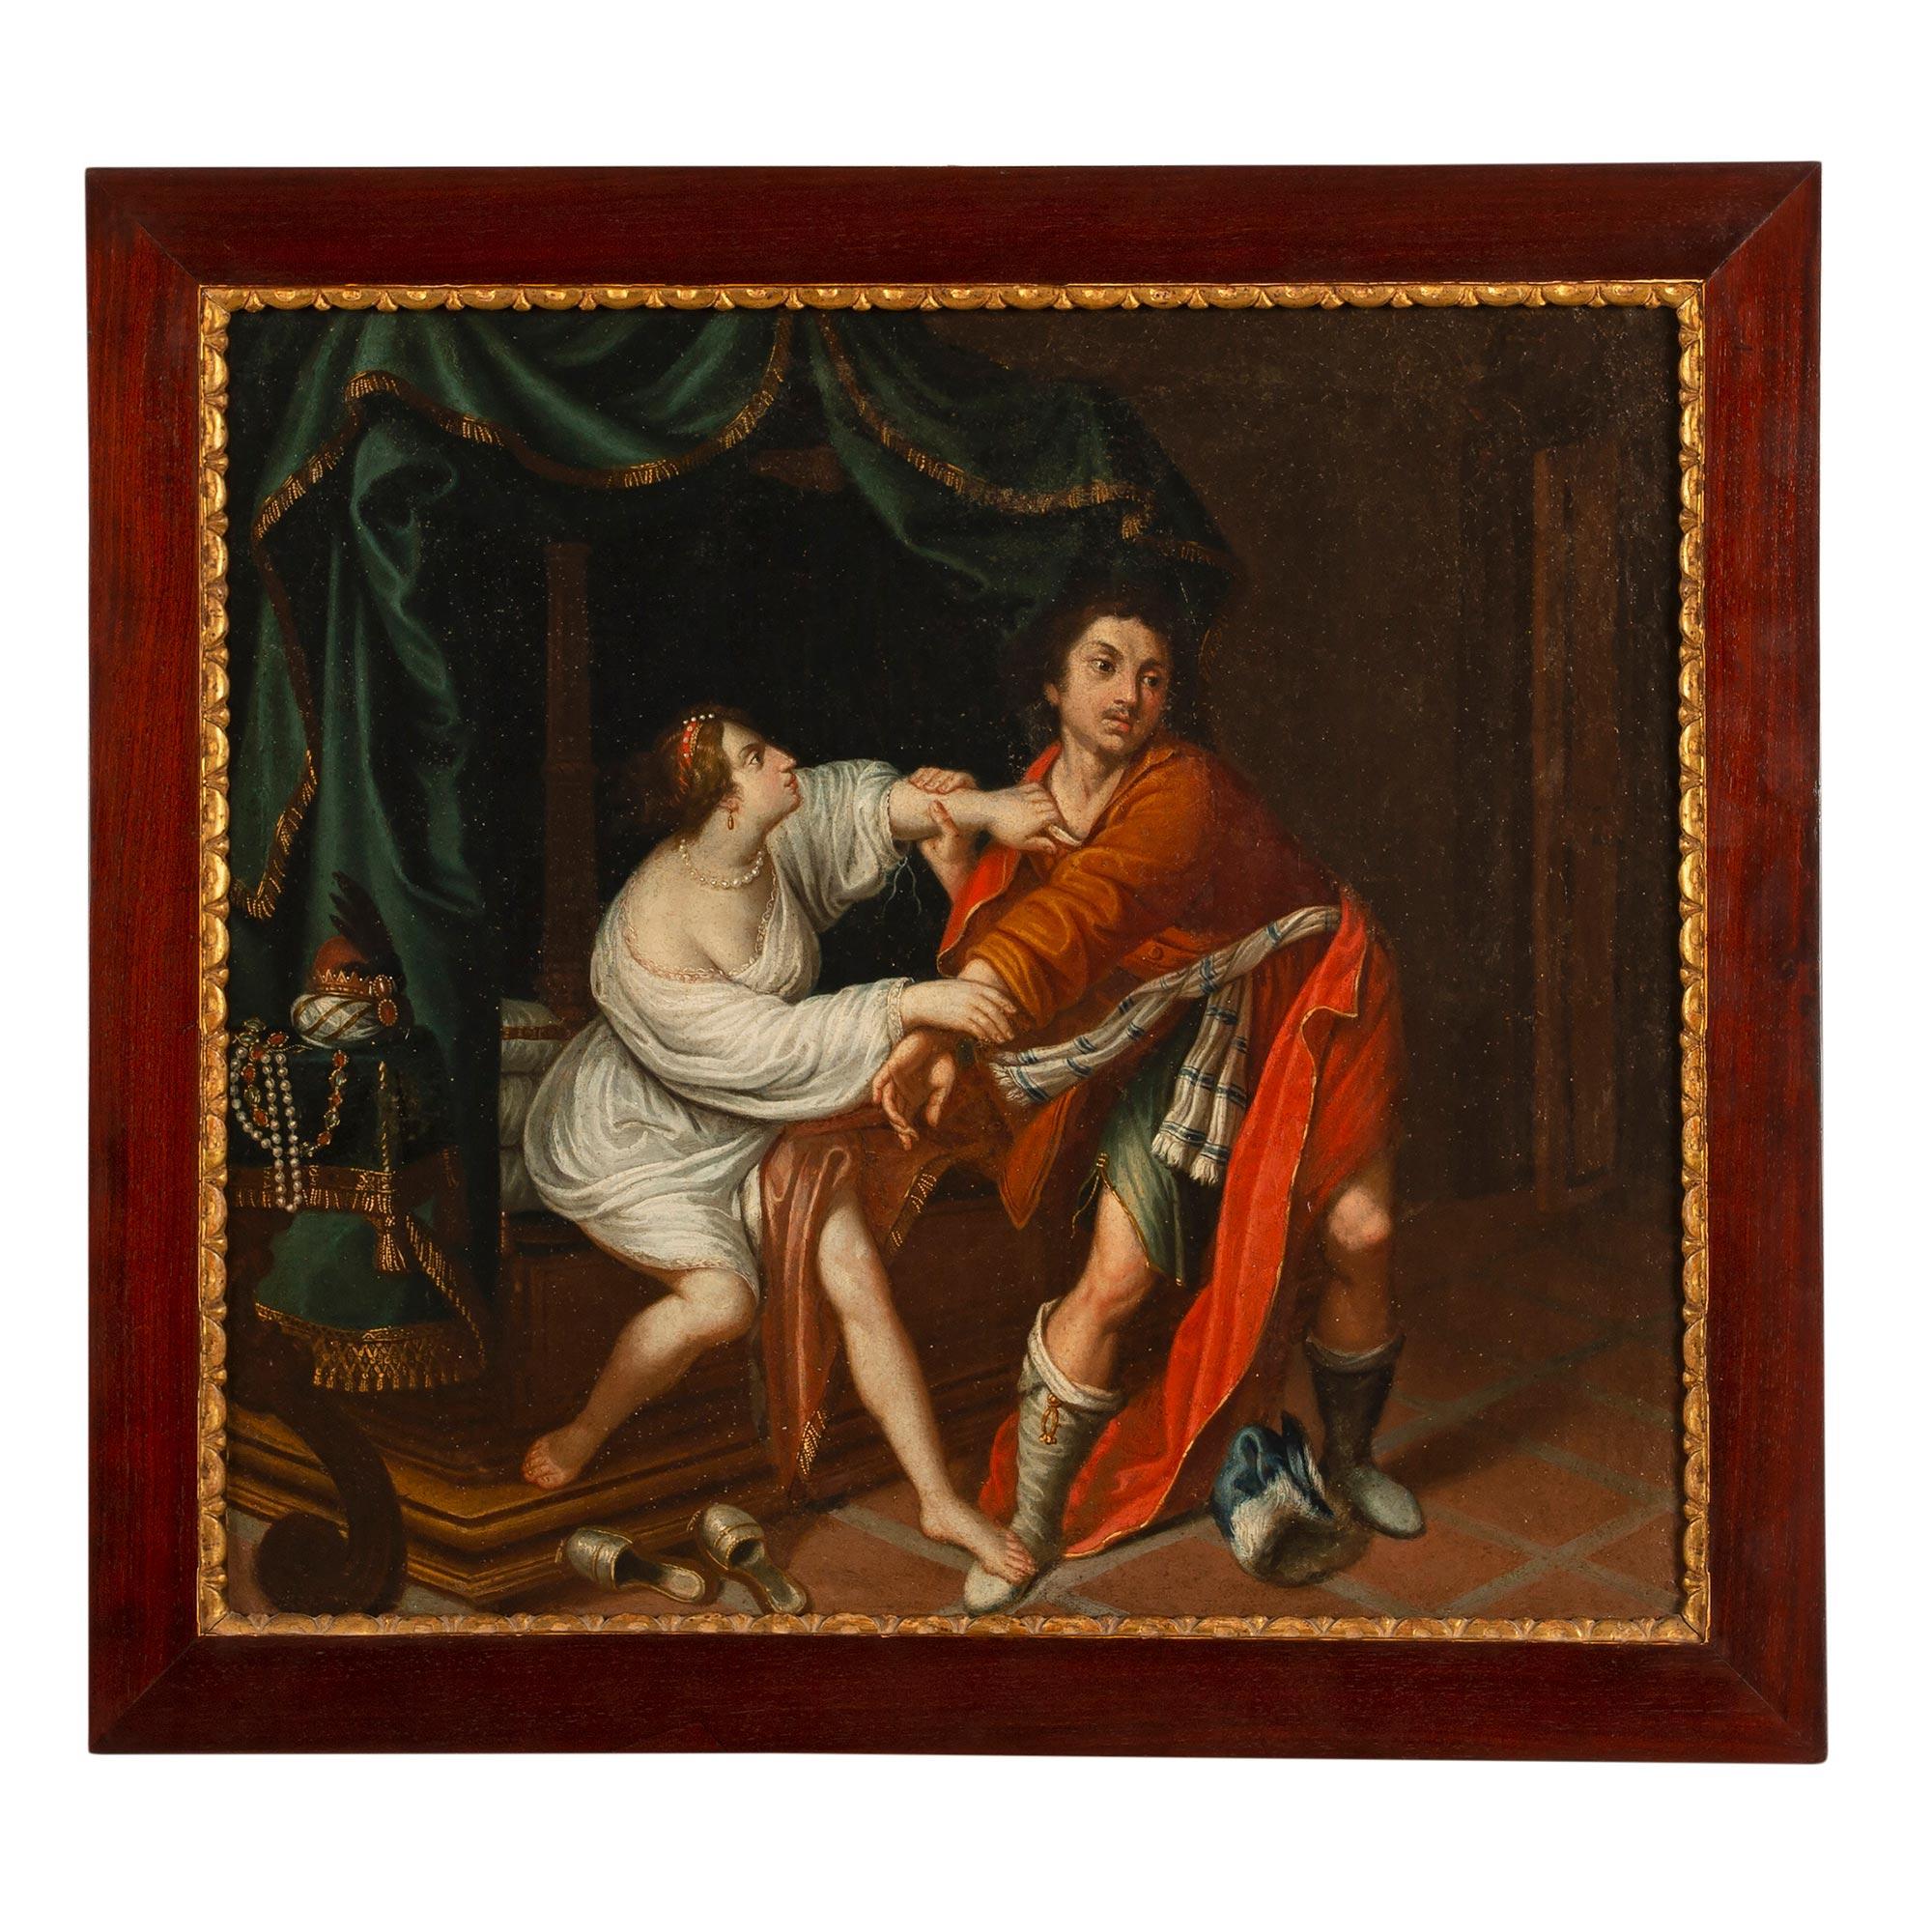 A striking pair of French 18th century oil on canvas in mahogany and giltwood frames. Each painting retains its original beautiful mahogany frame with a finely carved charming foliate giltwood band. The paintings display striking vivid colors and